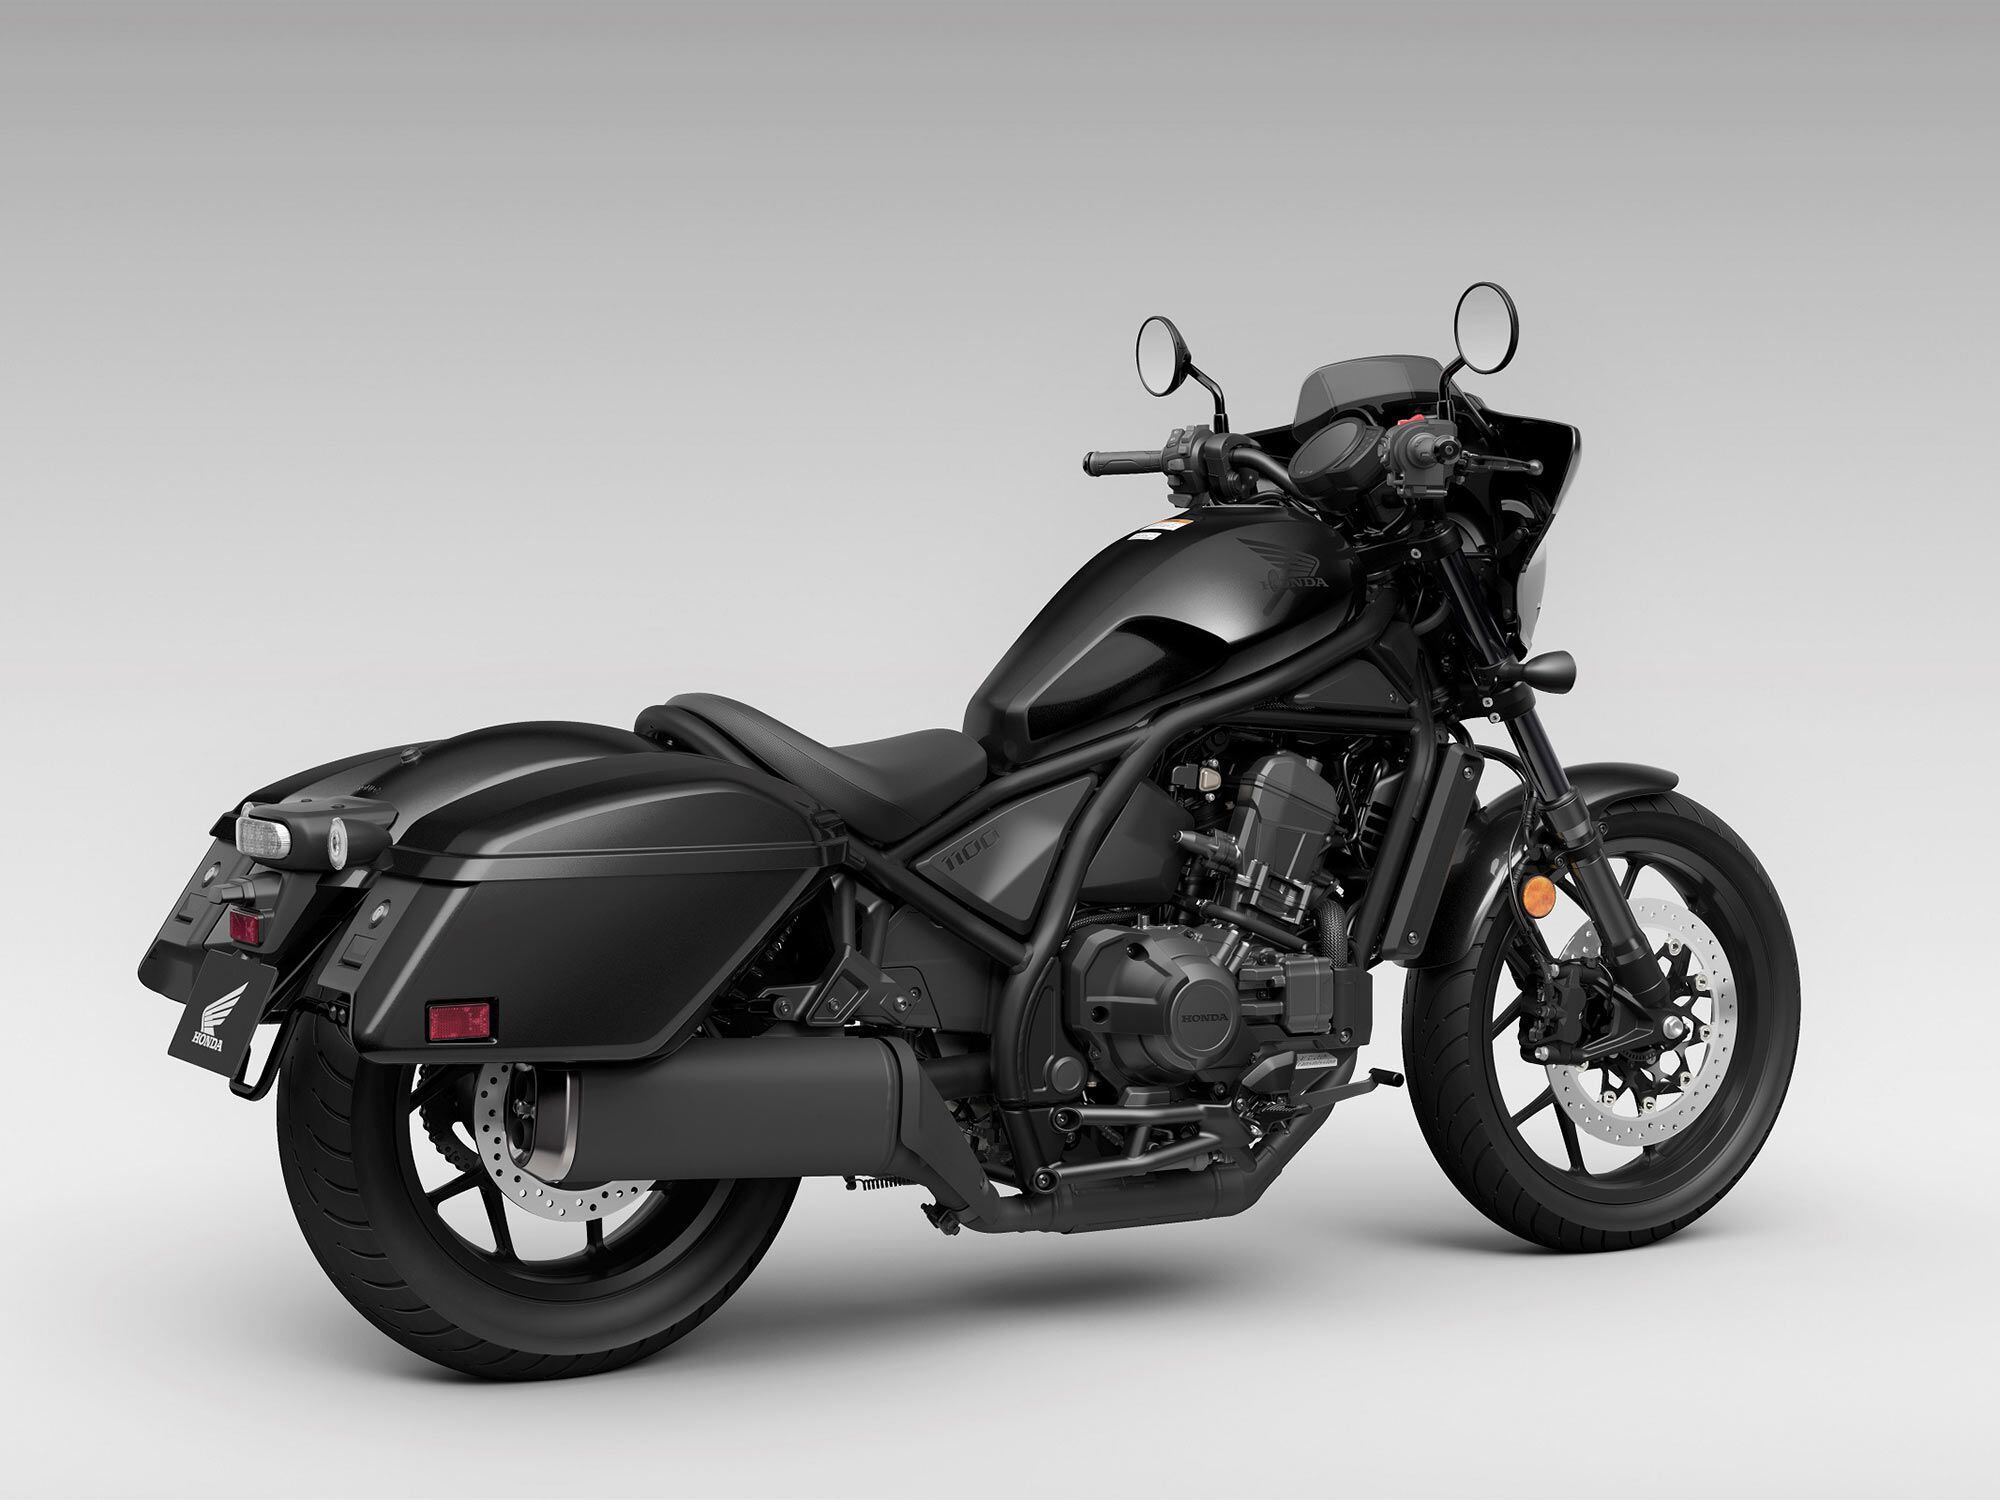 The 1,083cc parallel-twin engine carries over unchanged. In Metallic Black, nearly every part of the 1100T looks dark.